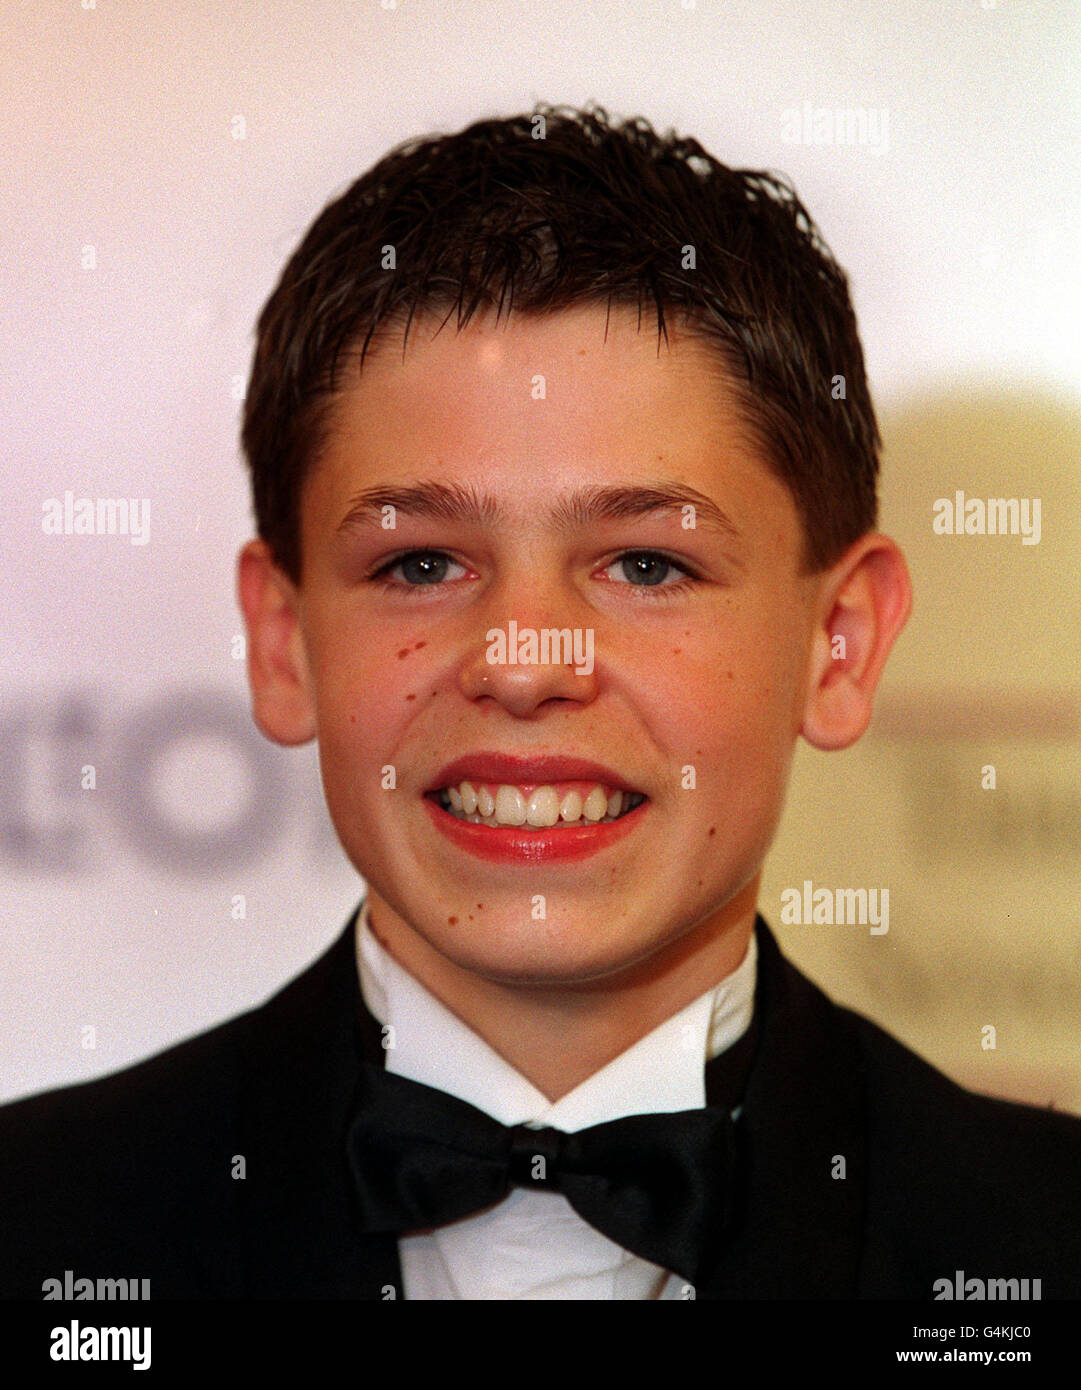 Young actor Kelvin Fletcher, who plays Andy Hopwood in ITV's Emmerdale, at the British Soap Awards in London. He won the award for Best Dramatic Performance. Stock Photo